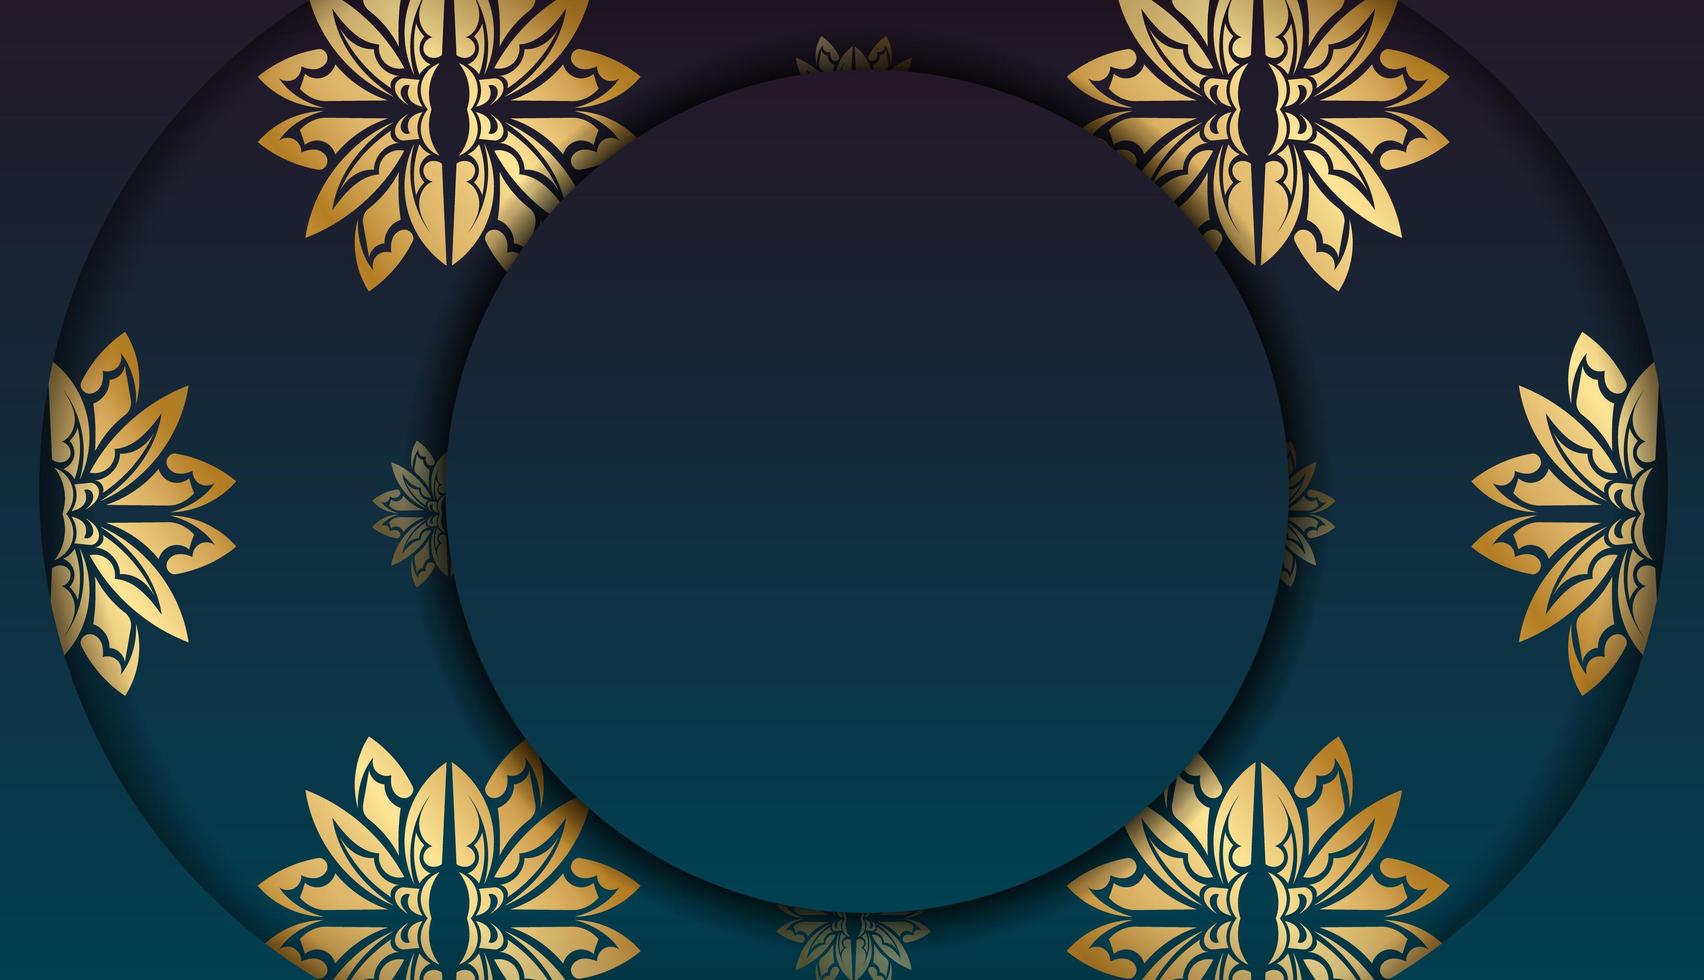 Background with gradient blue color with mandala gold pattern and place for logo or text vector